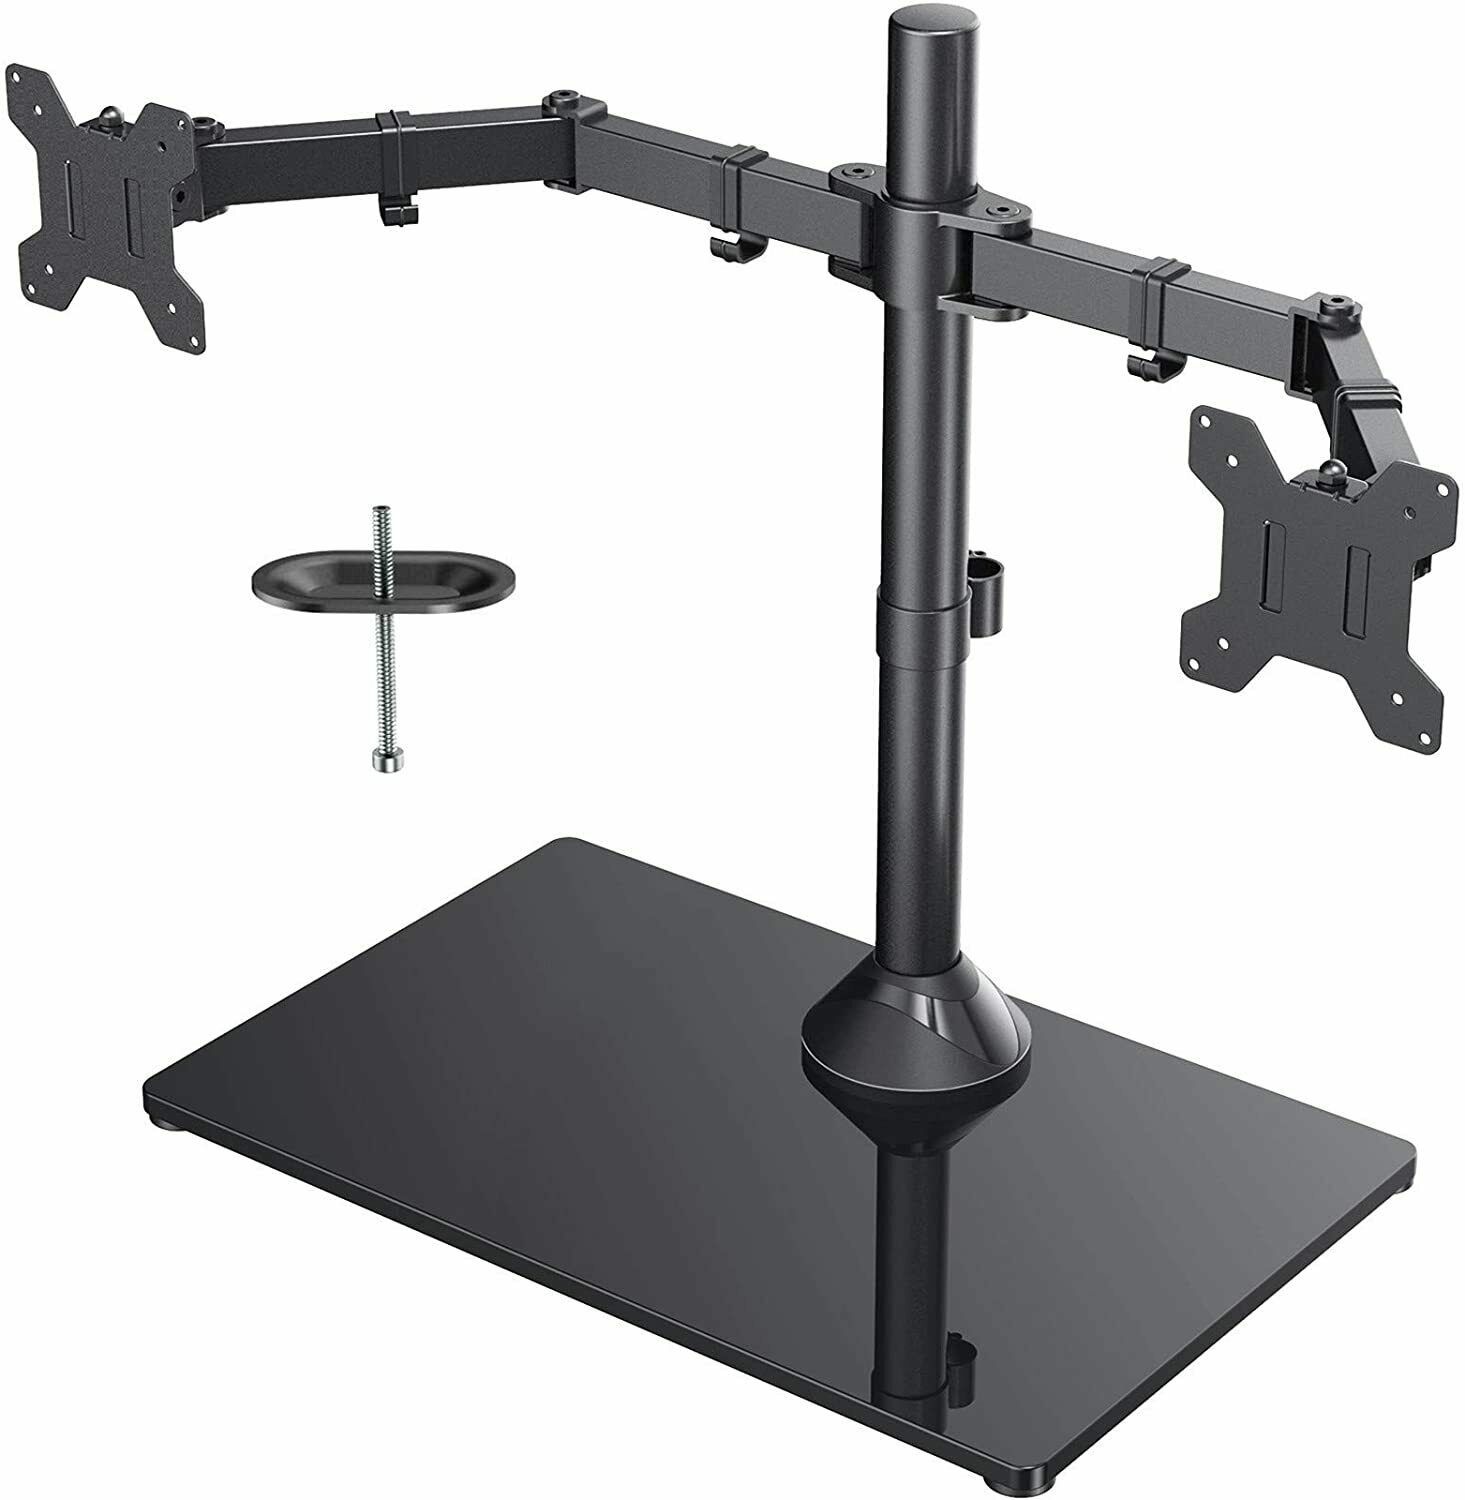 Dual Monitor Stand for 13” to 27” Screens,Free Standing Adjustable Monitor Mount